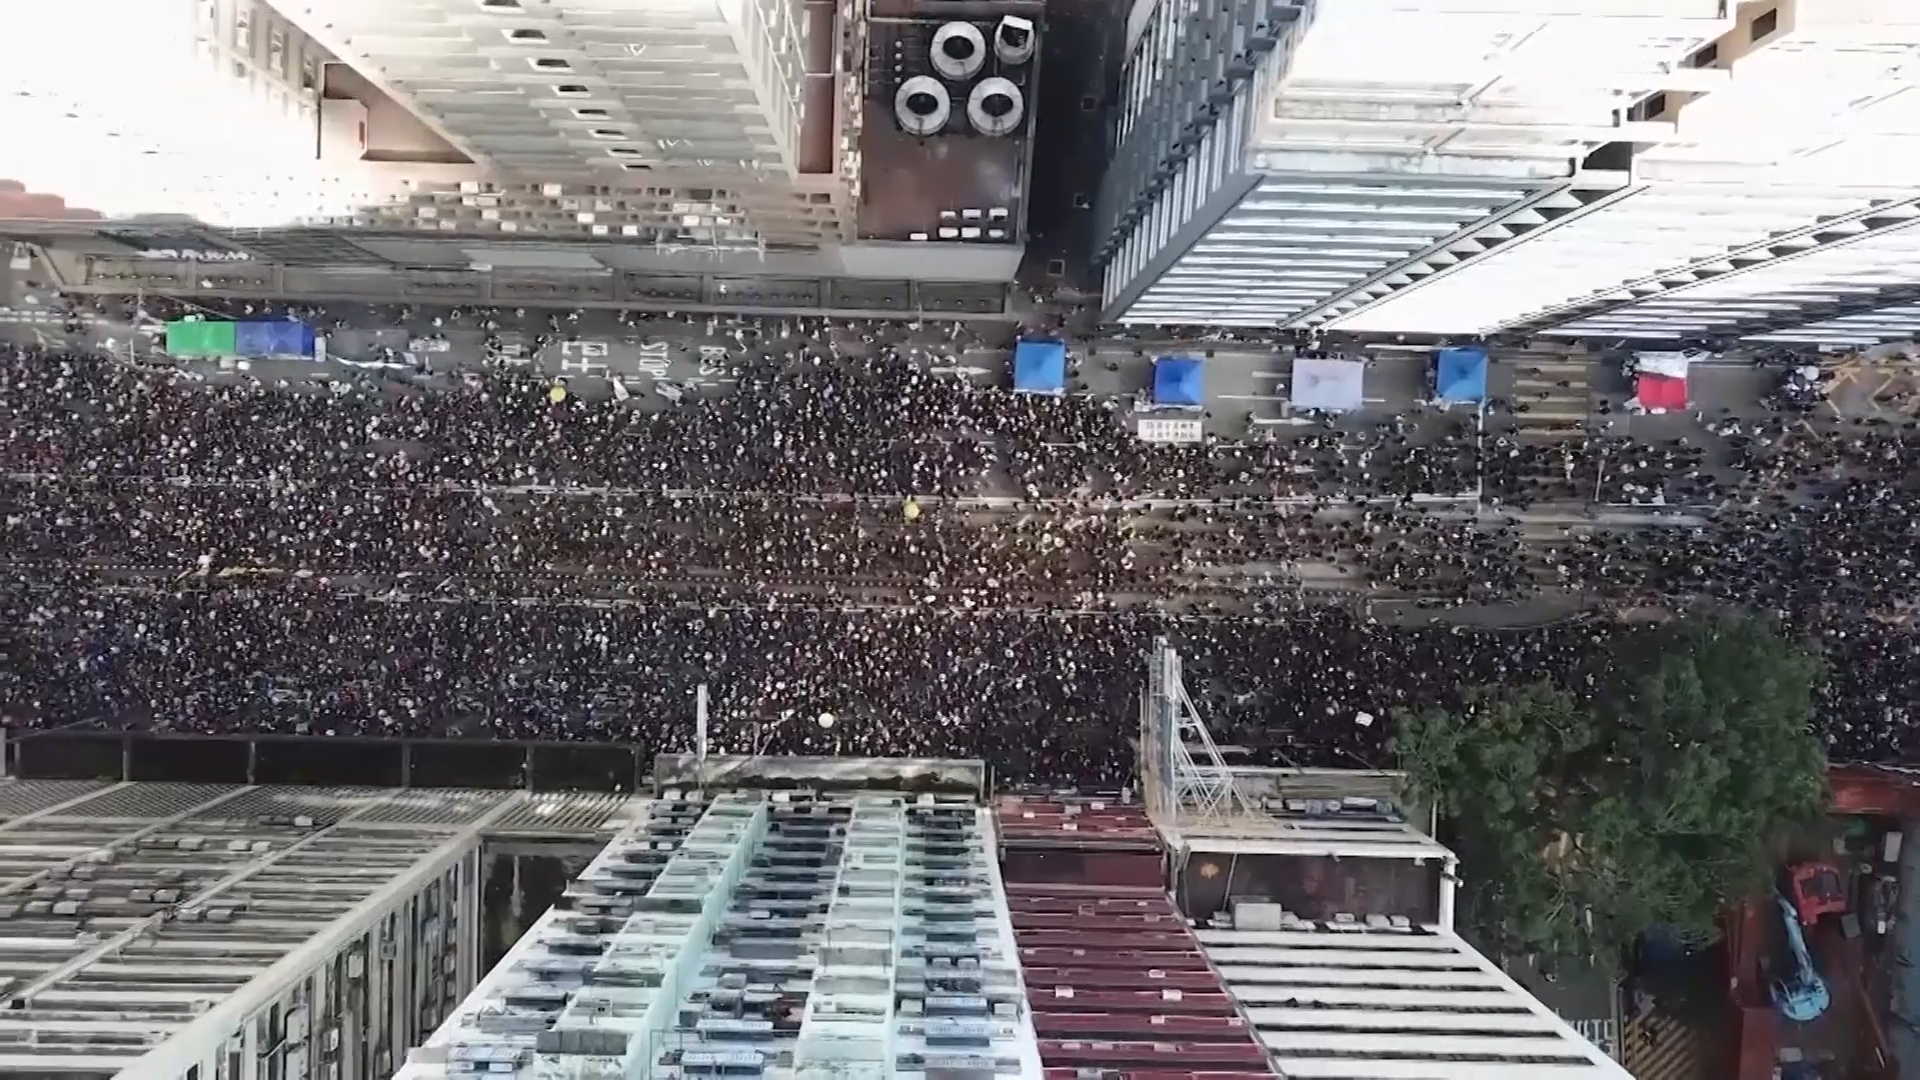 Q&A: What is Happening in the Streets of Hong Kong?